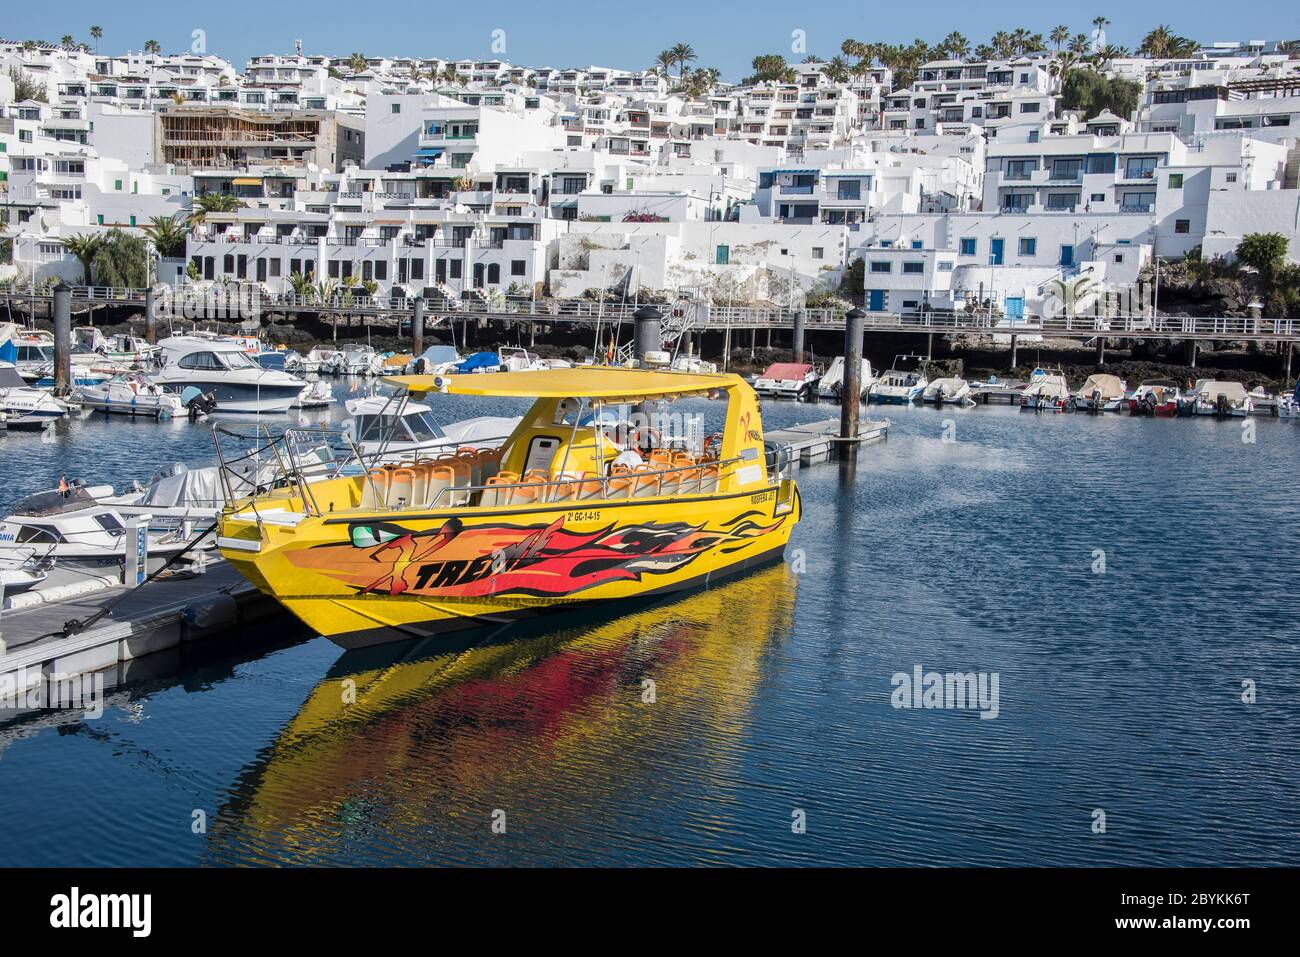 Yellow Treme Biosfera Jet berthed at Old Town Harbour, Puerto Del Carmen, Lanzarote, Canary Islands, Spain Stock Photo